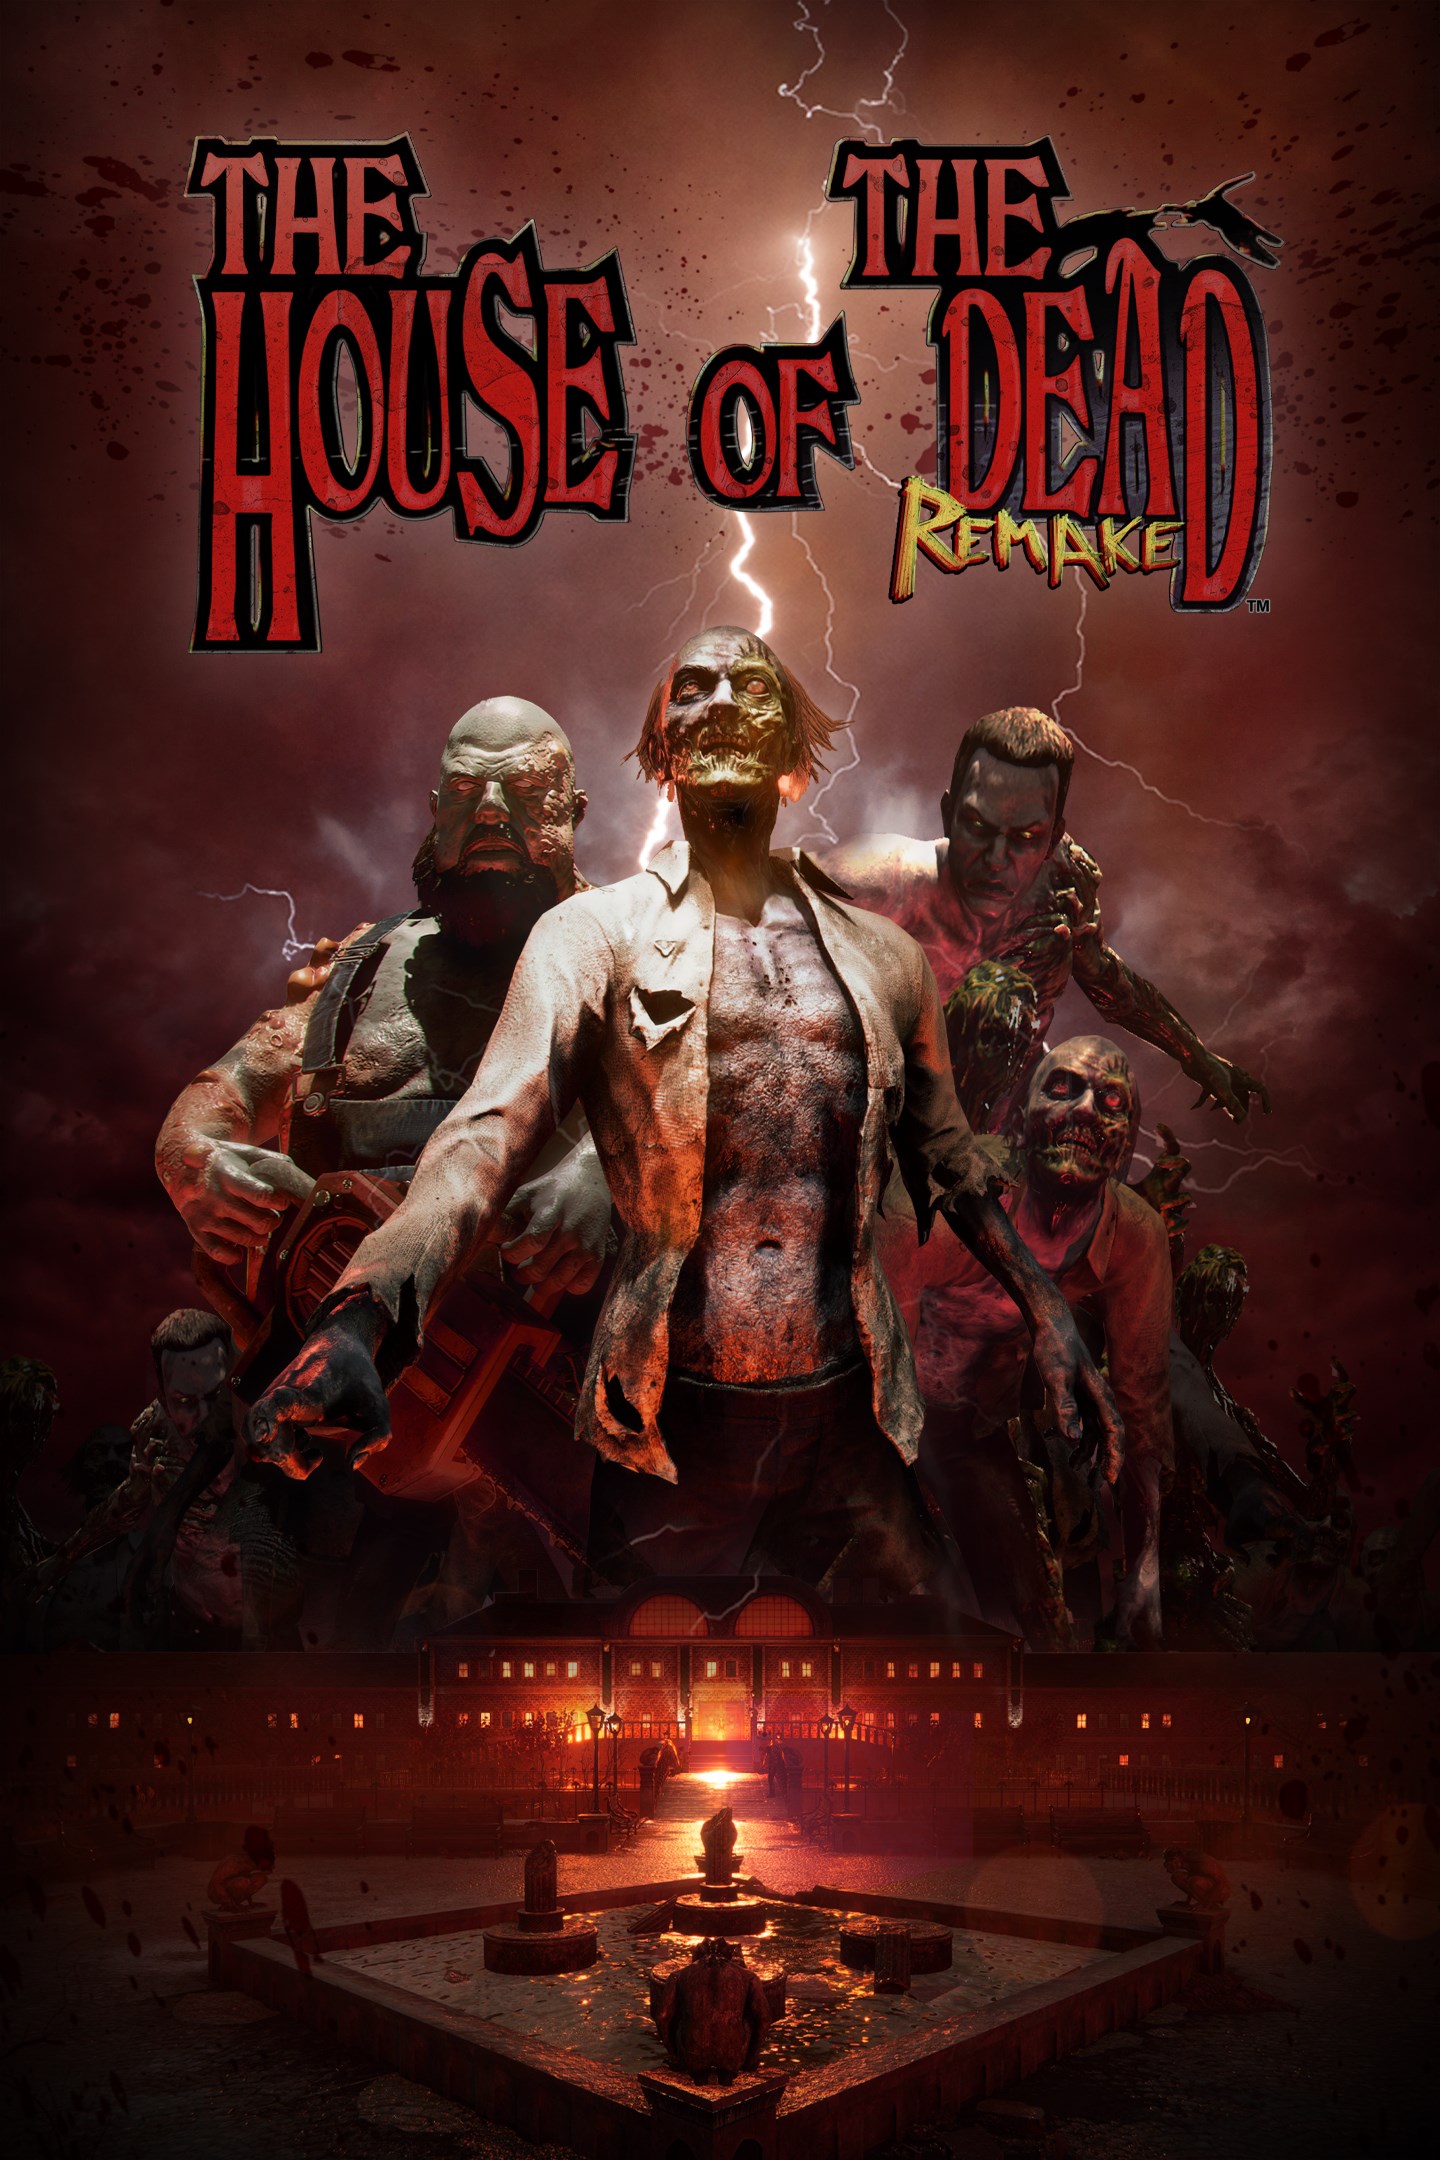 THE HOUSE OF THE DEAD: Remake boxshot